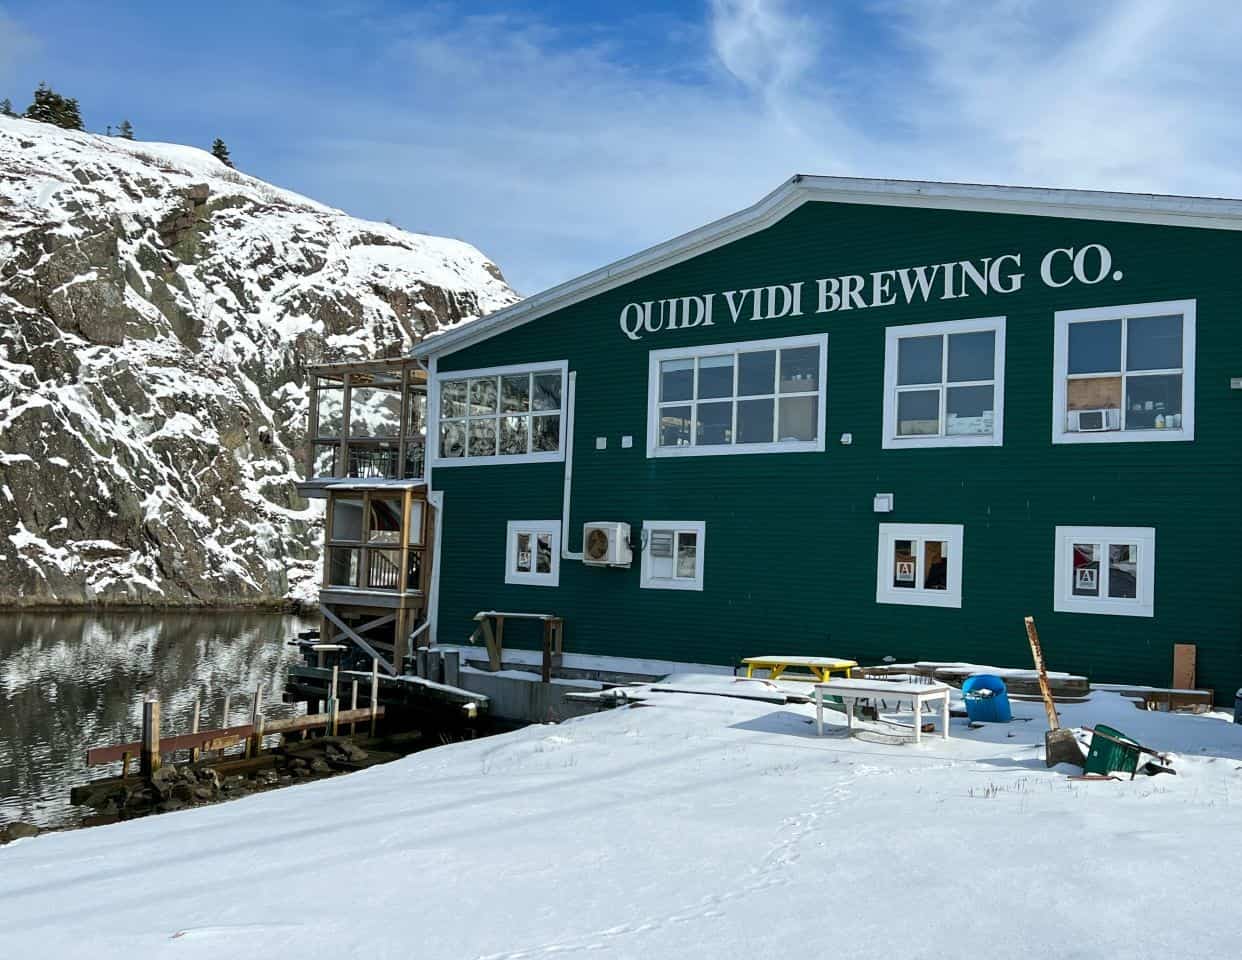 Quidi Vidi Brewery is the third biggest beer brewer in the province of Newfoundland and Labrador.